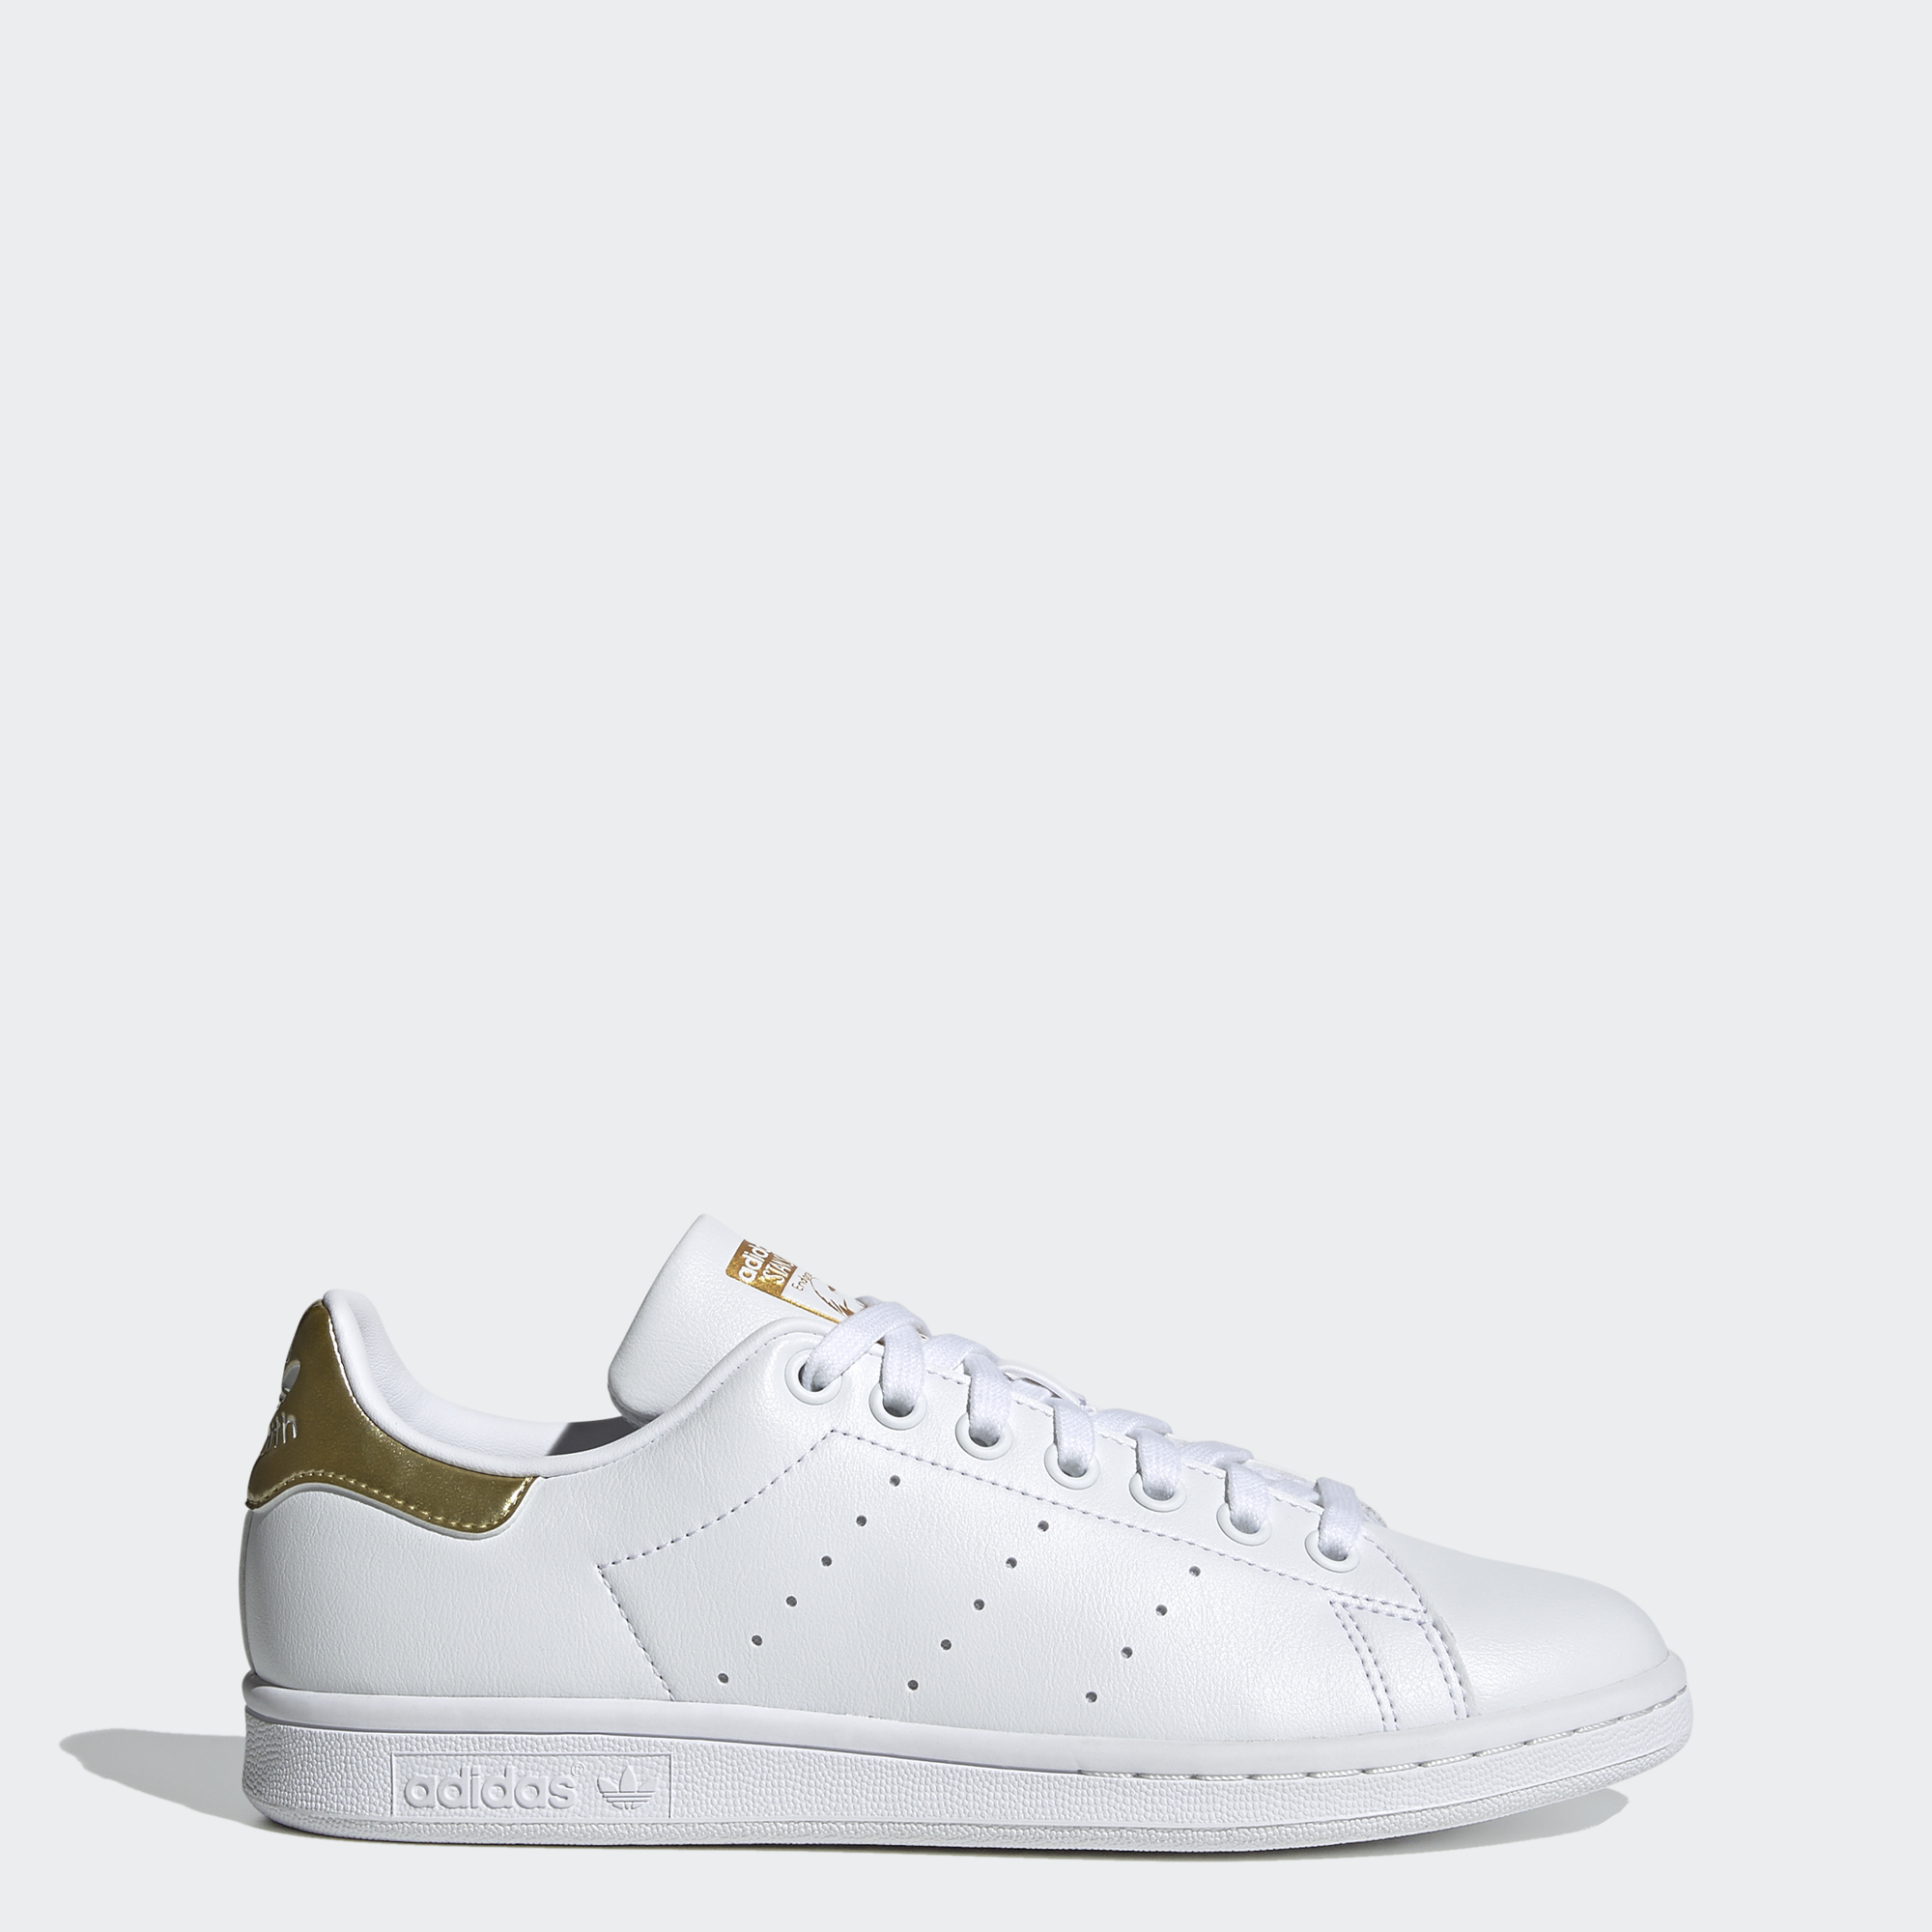 stan smith adidas womens sneakers